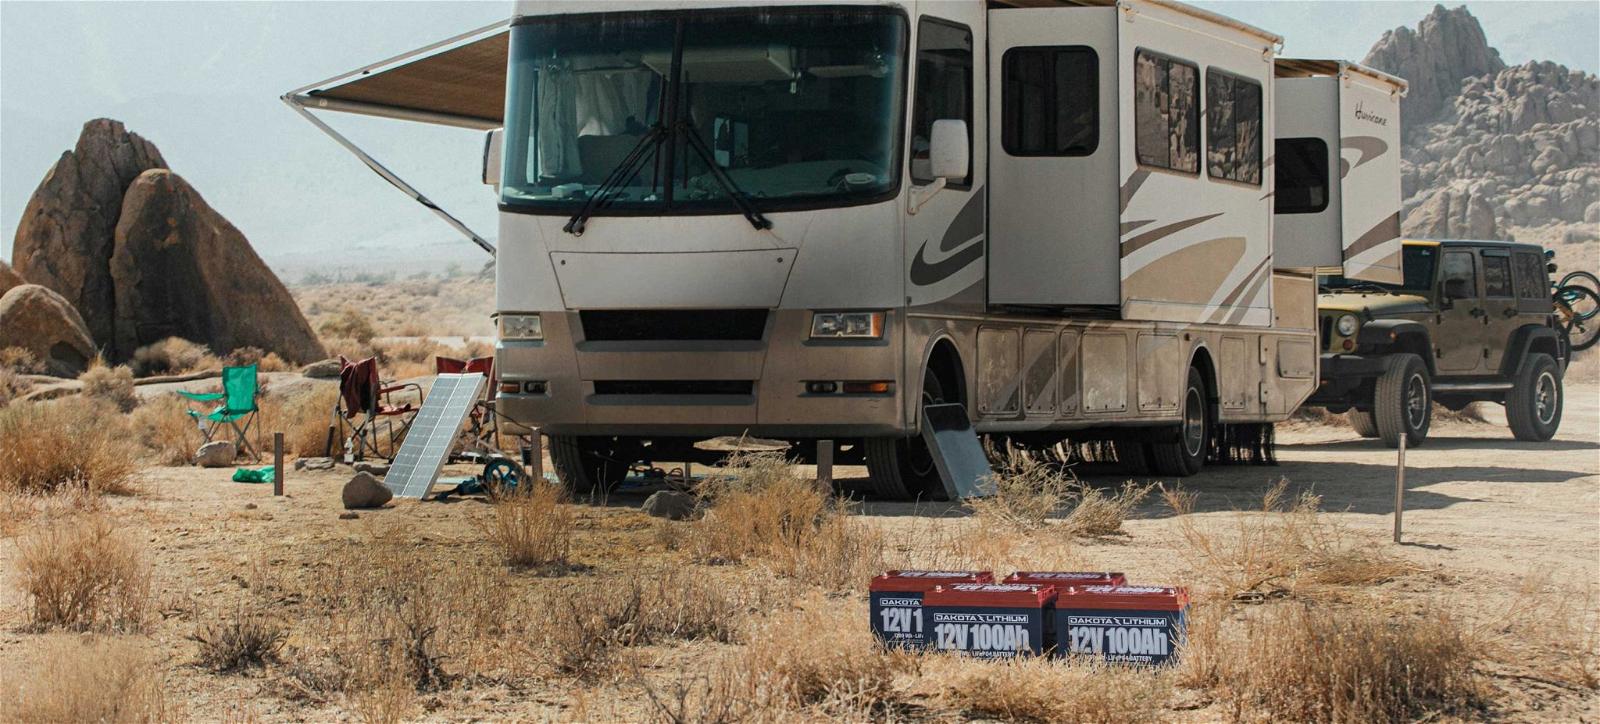 How To Choose a Lithium Battery for RVs, Campers & Vans